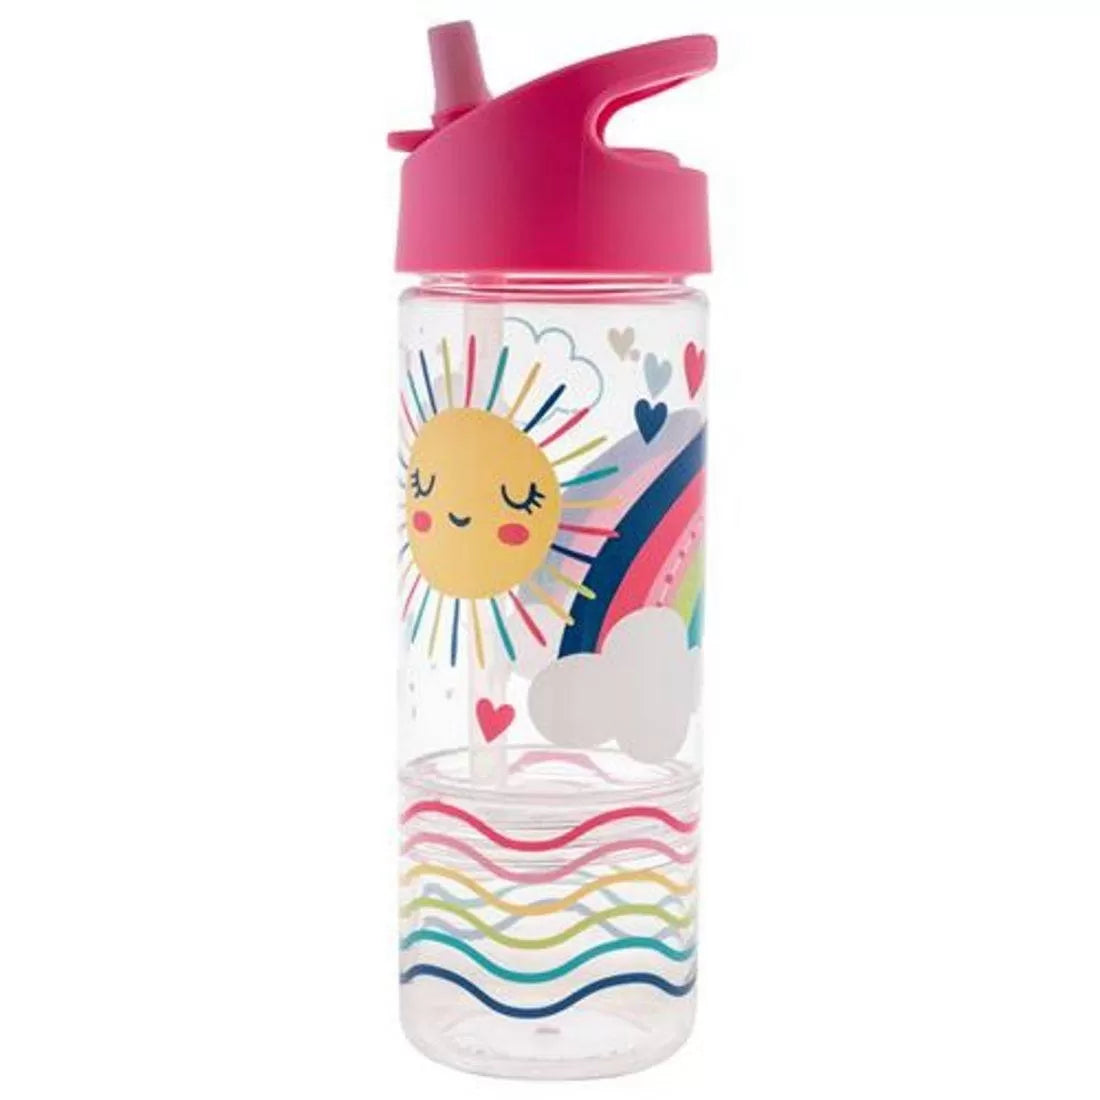 Stephen Joseph Sip And Snack Rainbow Water Bottle - BumbleToys - 5-7 Years, Cecil, Girls, Pre-Order, School Supplies, Water Bottle